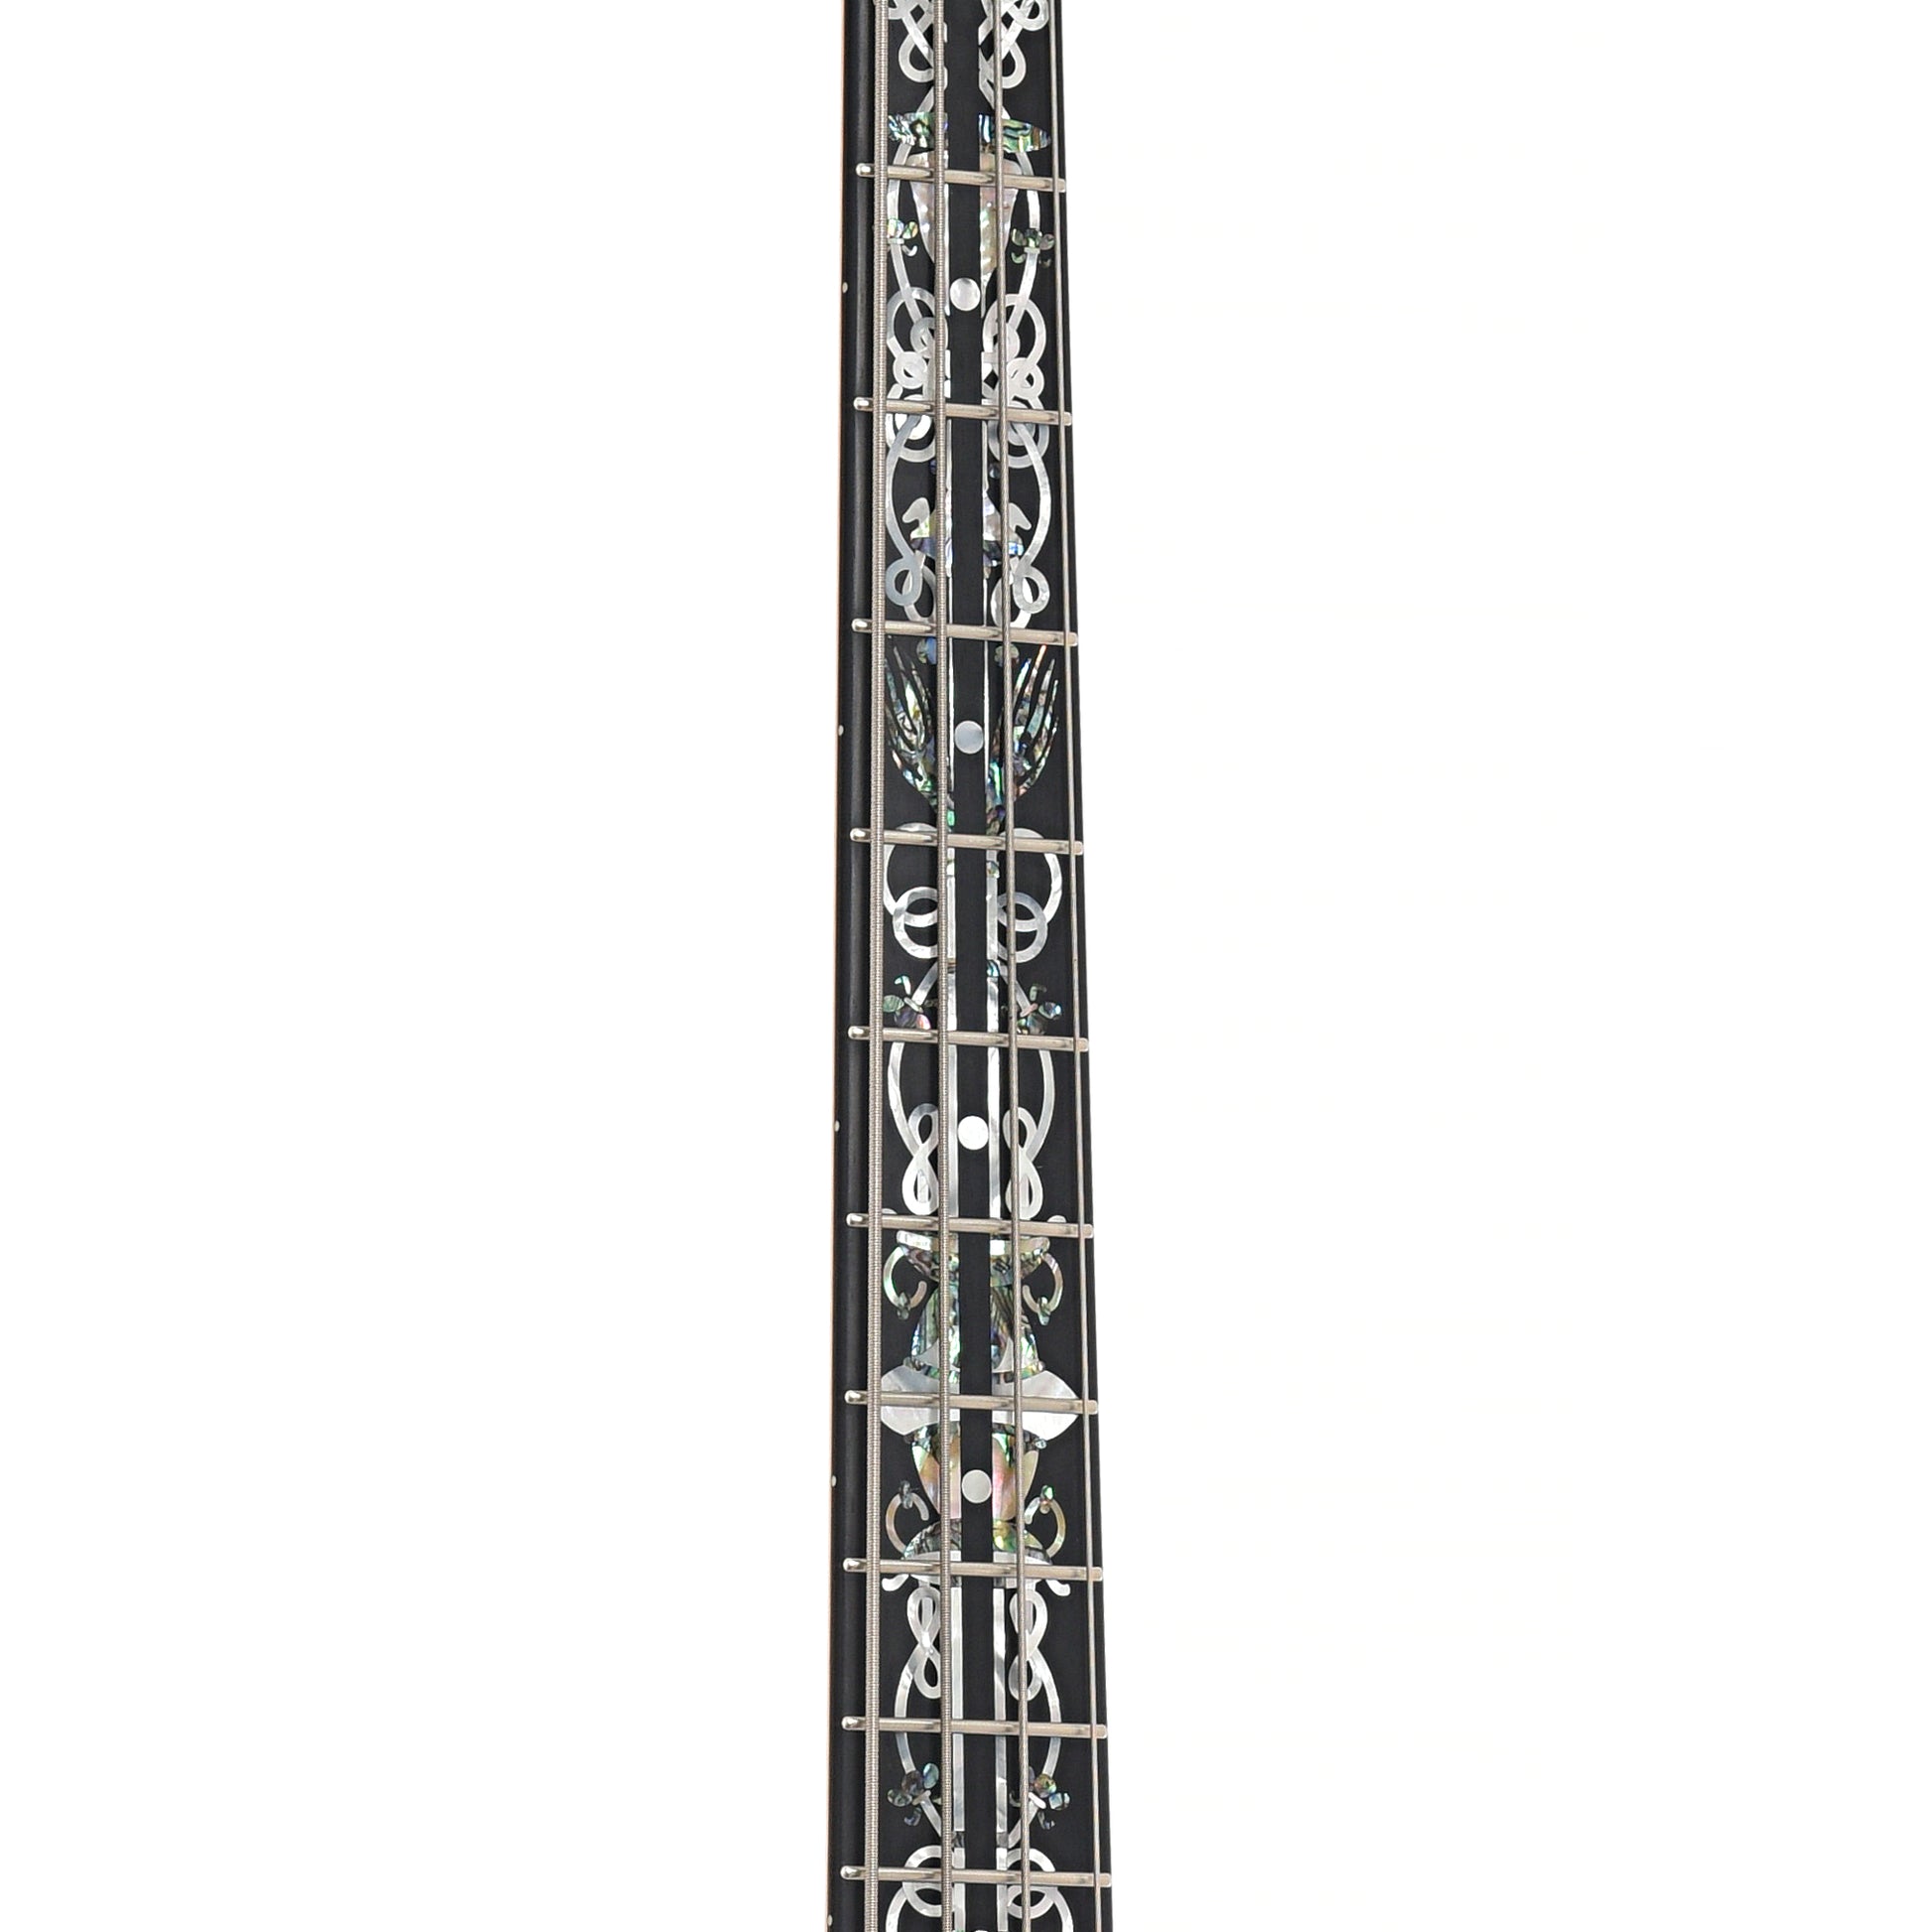 Fretboard for Ibanez 30th Anniversary Musician Bass